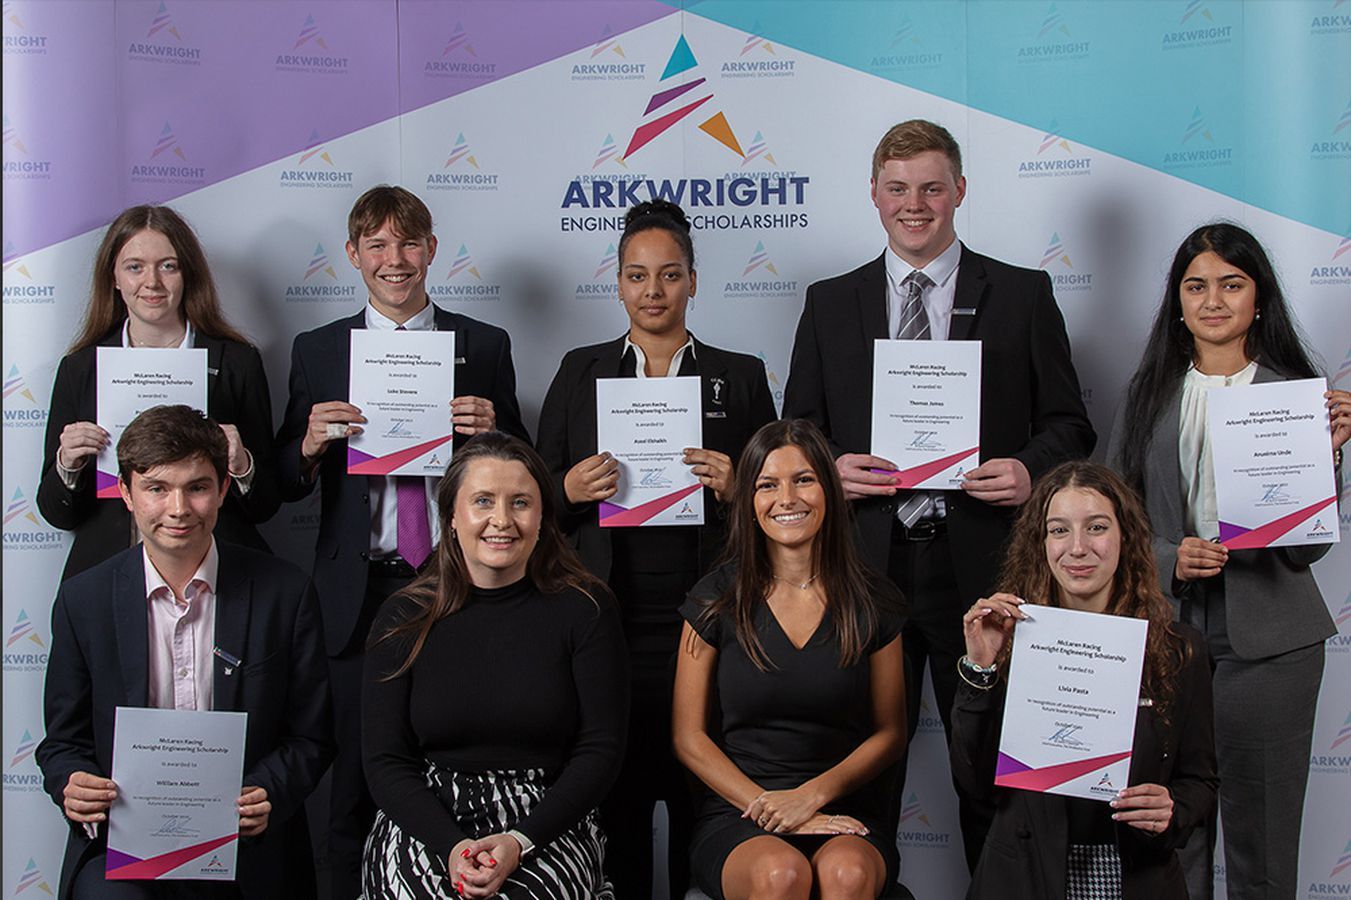 We have sponsored seven new students as part of The Smallpeice Trust’s Arkwright Engineering Scholarship programme